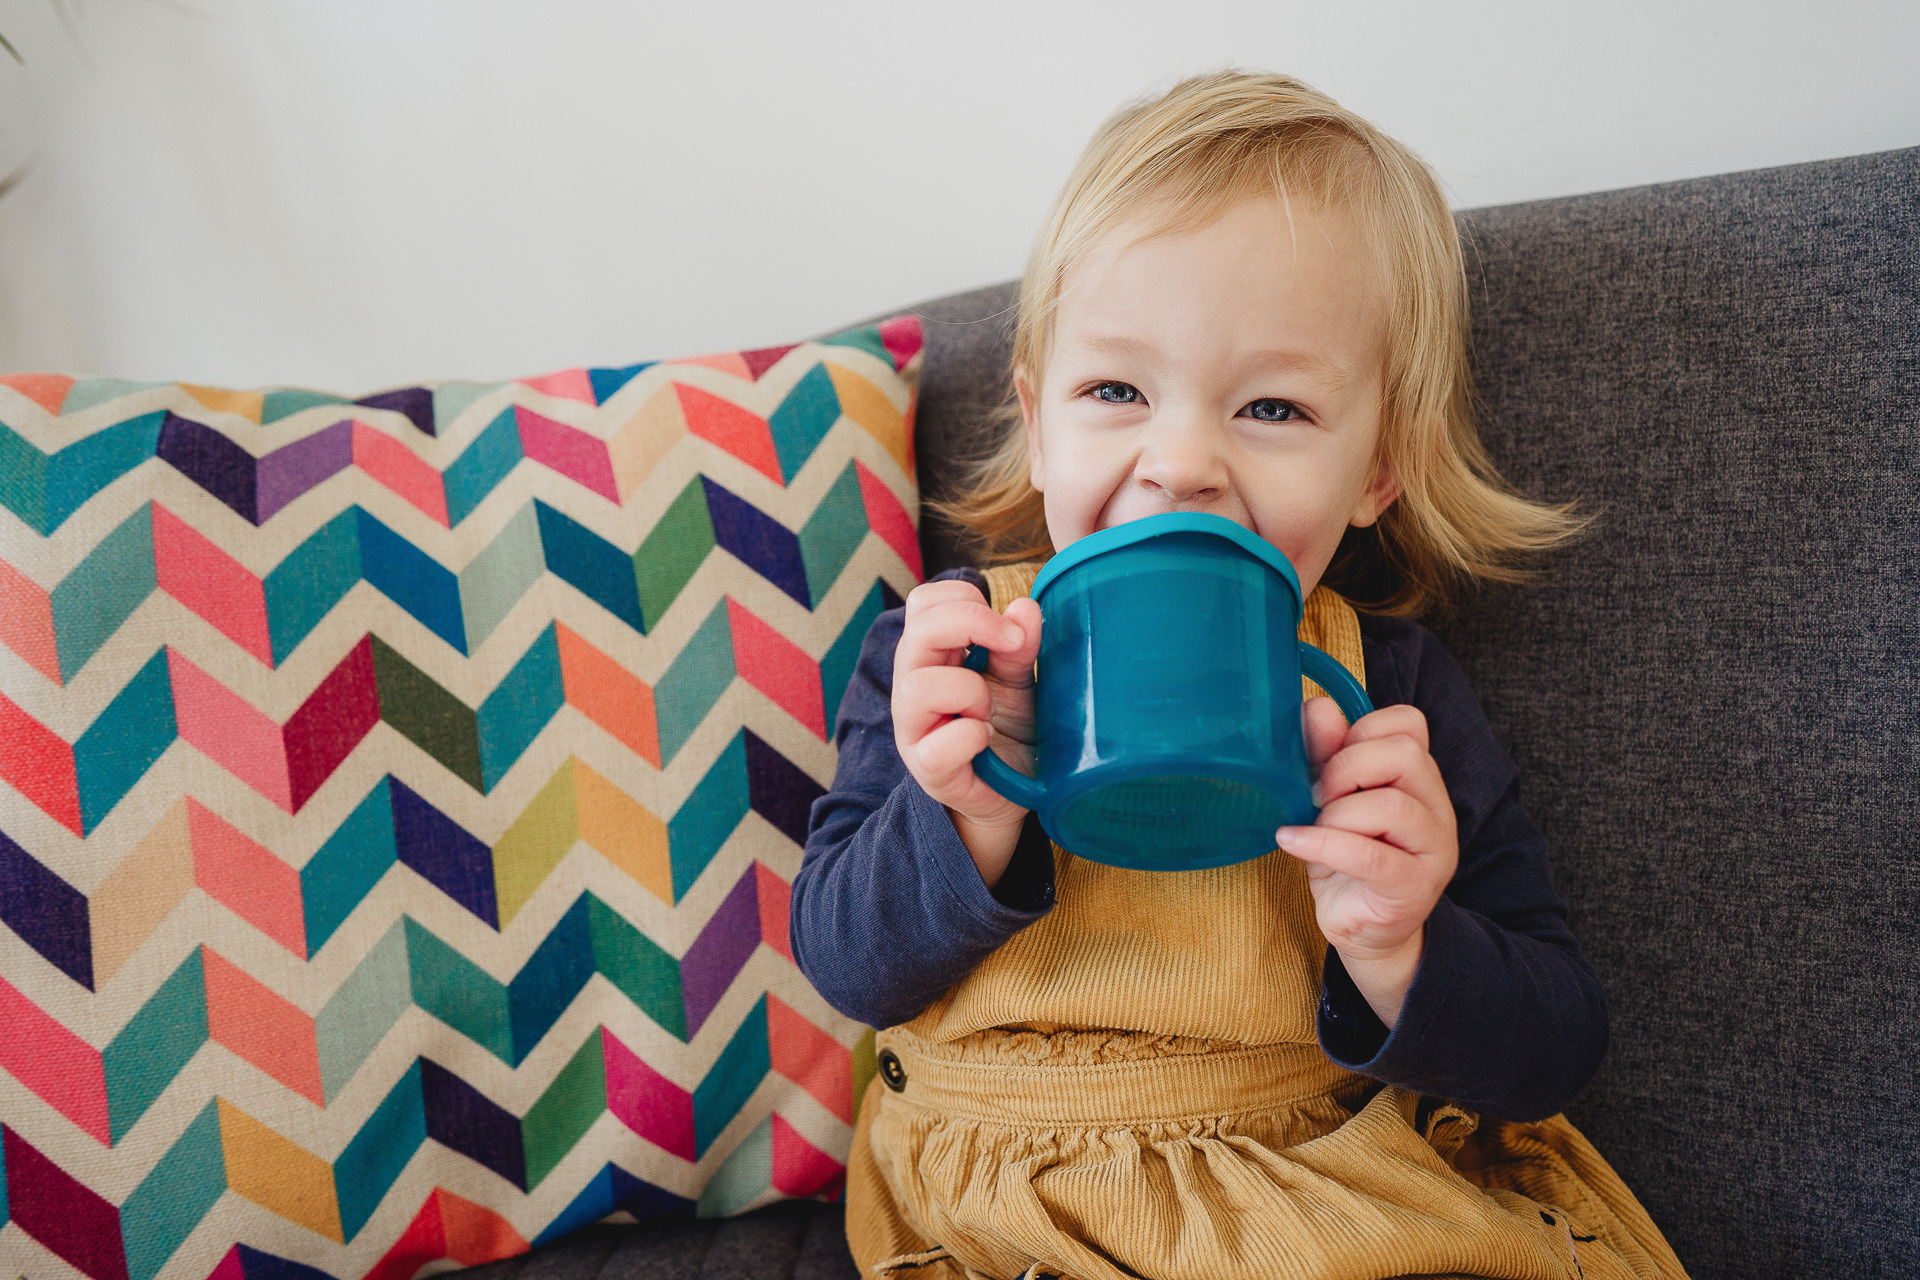 A toddler girl drinking from a blue cup